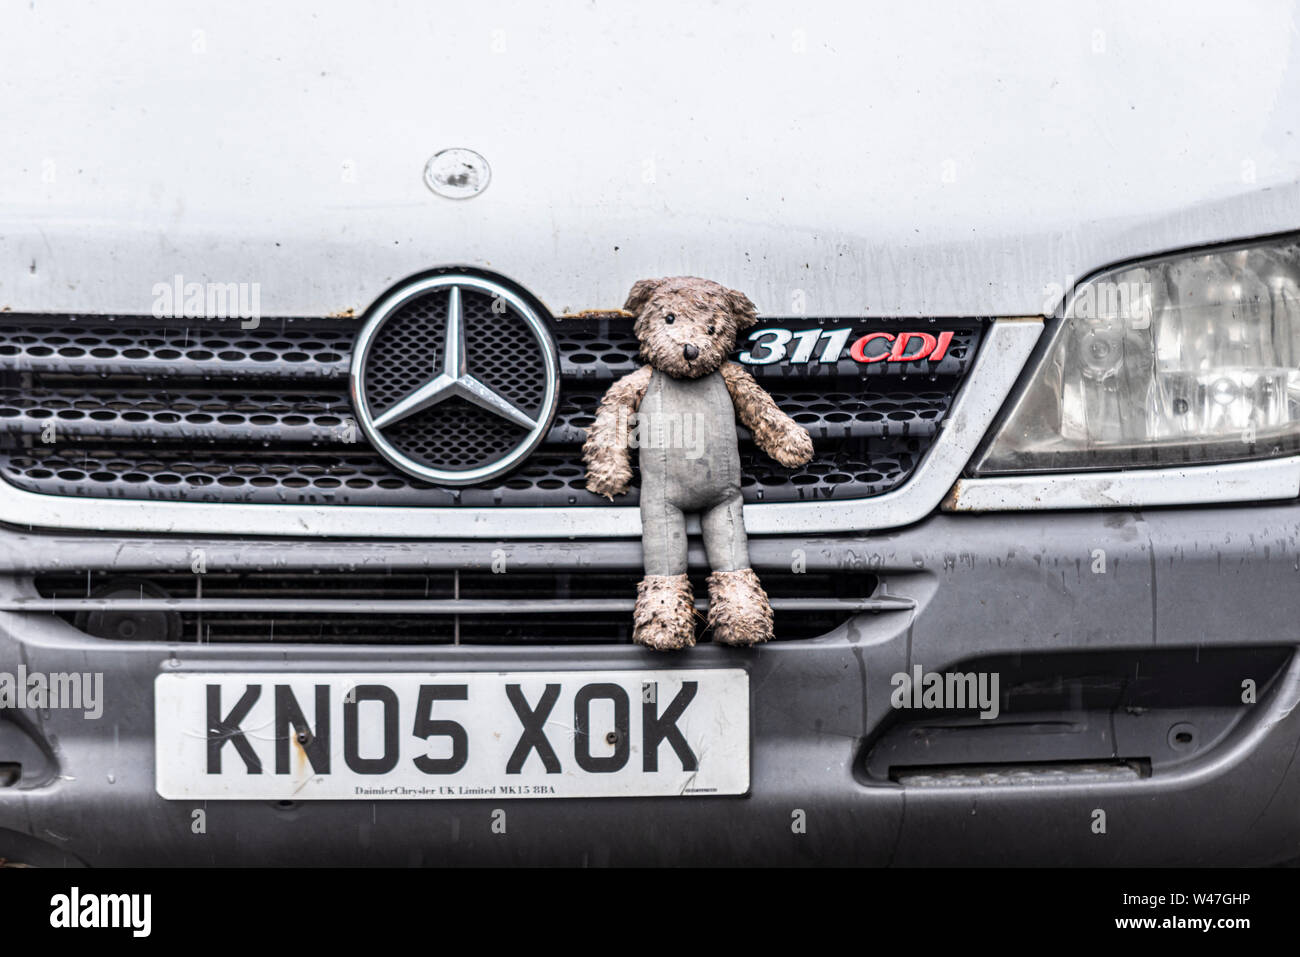 Old van with sad worn weathered looking child's toy teddy bear attached to the front bonnet grill. Wet from rain and dirty from road grime. Bedraggled Stock Photo